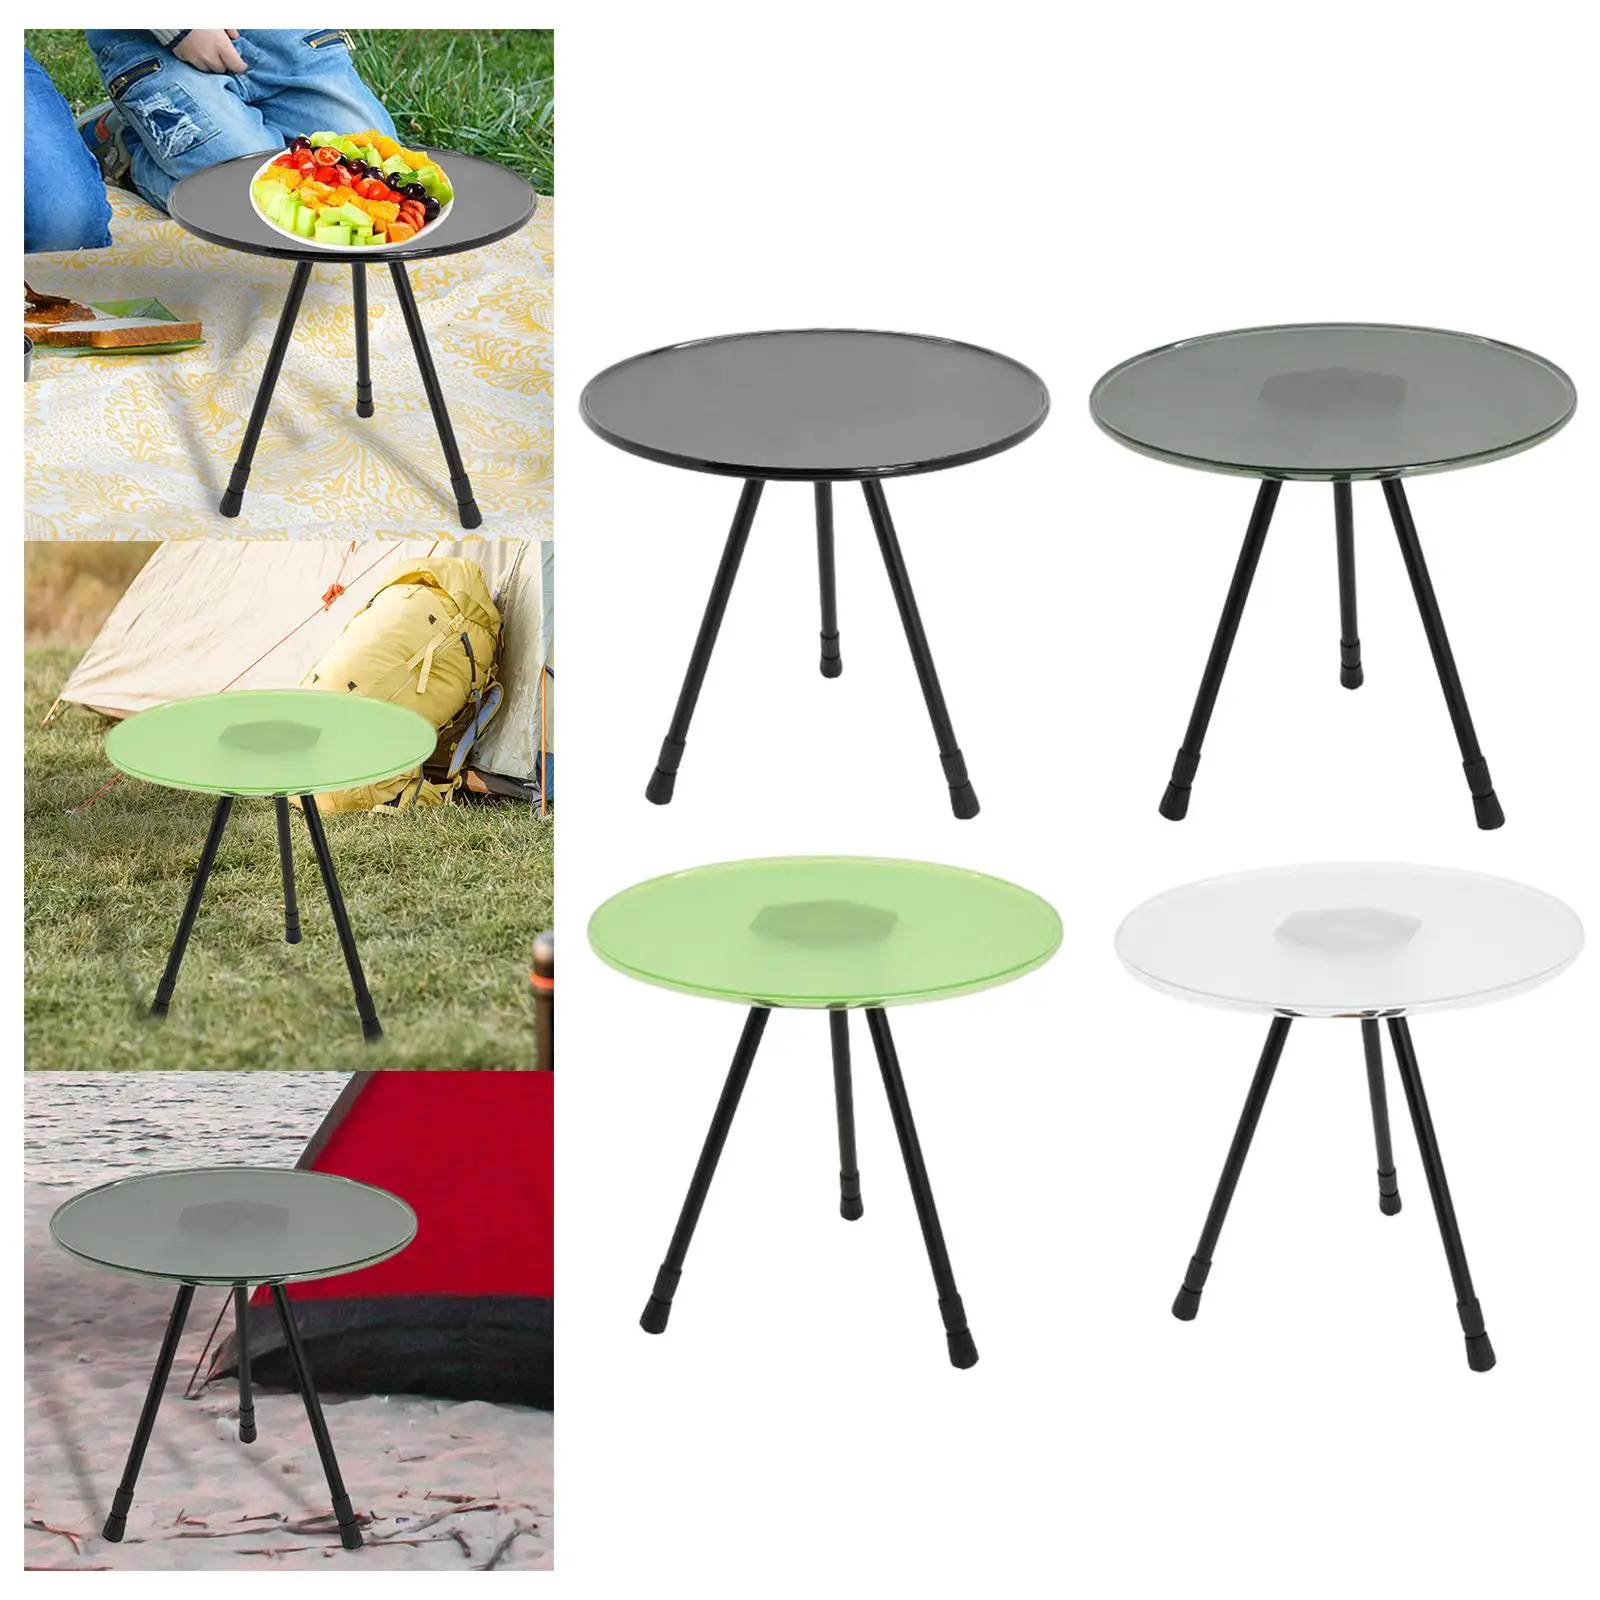 Three Legged Round Table Folding Outdoor Height Adjustable Multifunctional Telescopic Lifting Desk for Barbecue Beach Garden